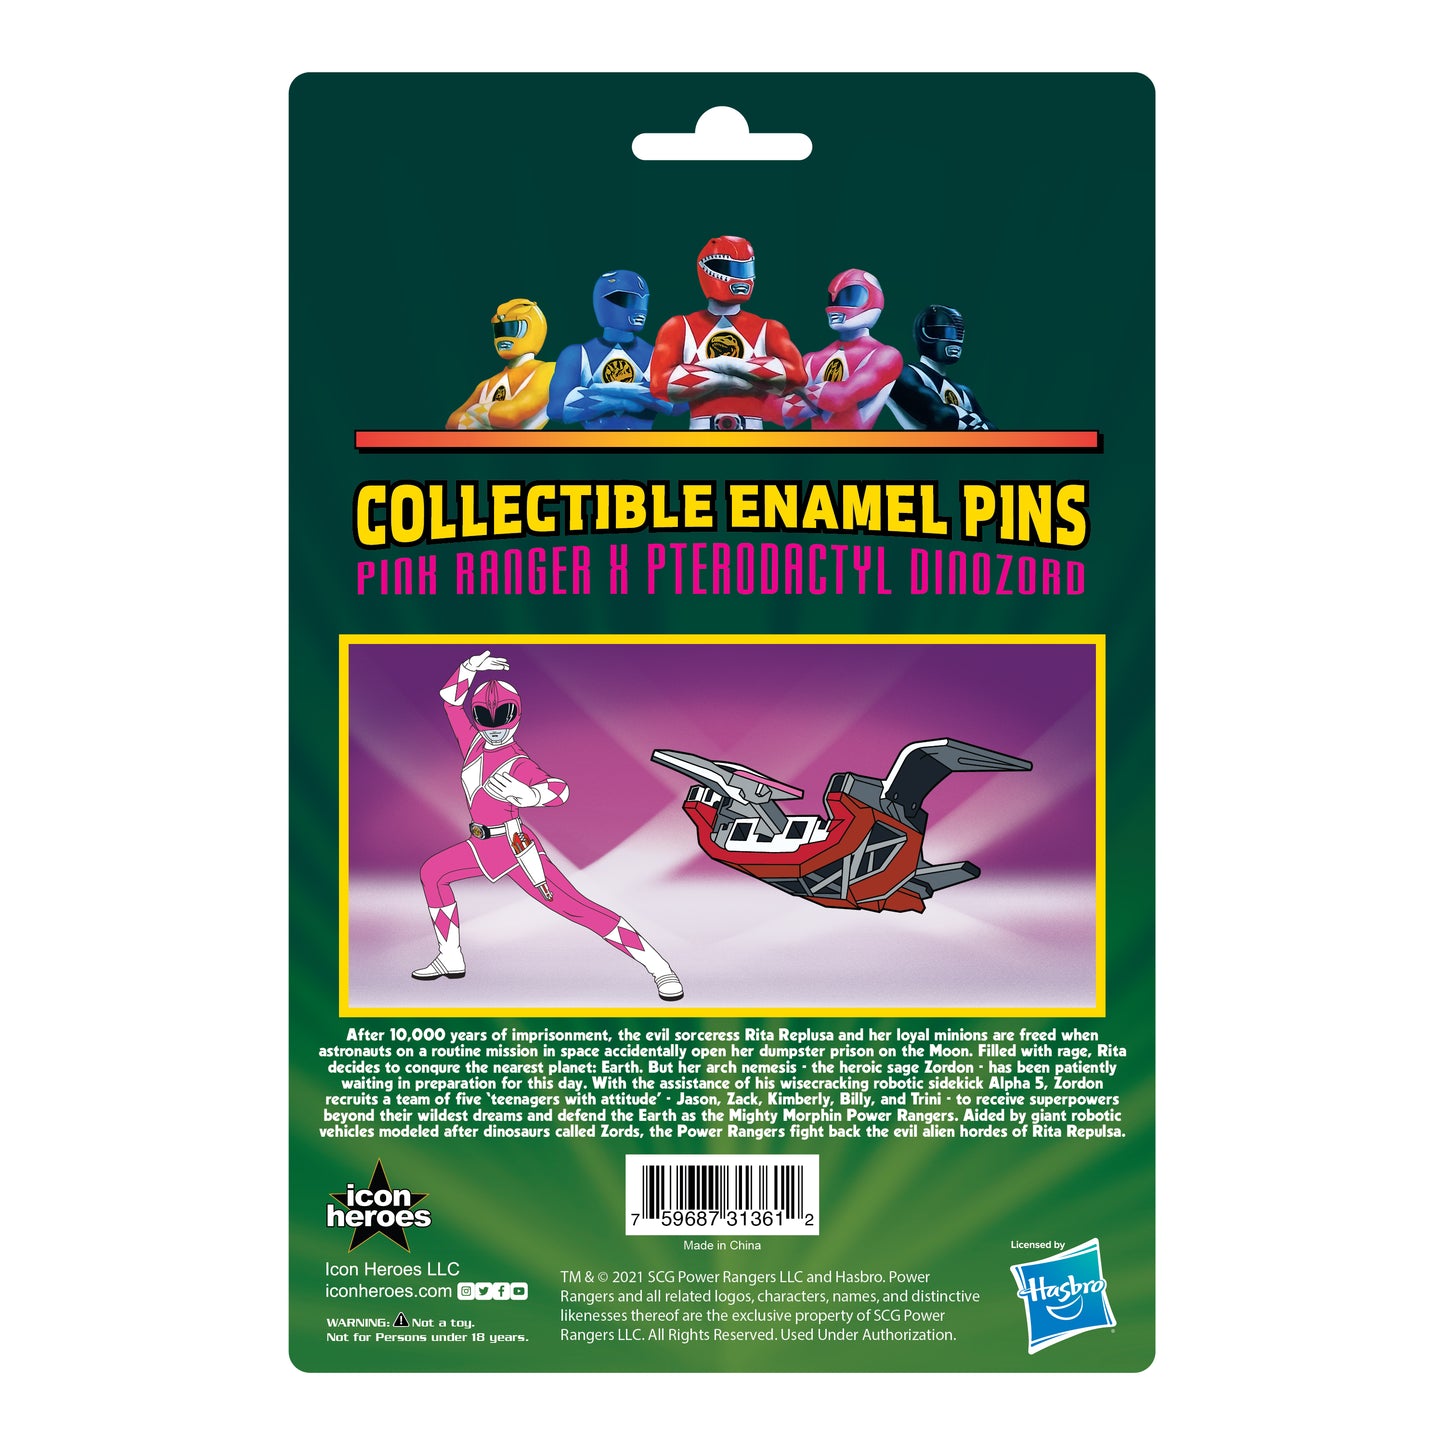 Power Rangers Pink Ranger X Pterodactyl Dinozord Pin Set - Available 4th Quarter 2021 - Icon Heroes 